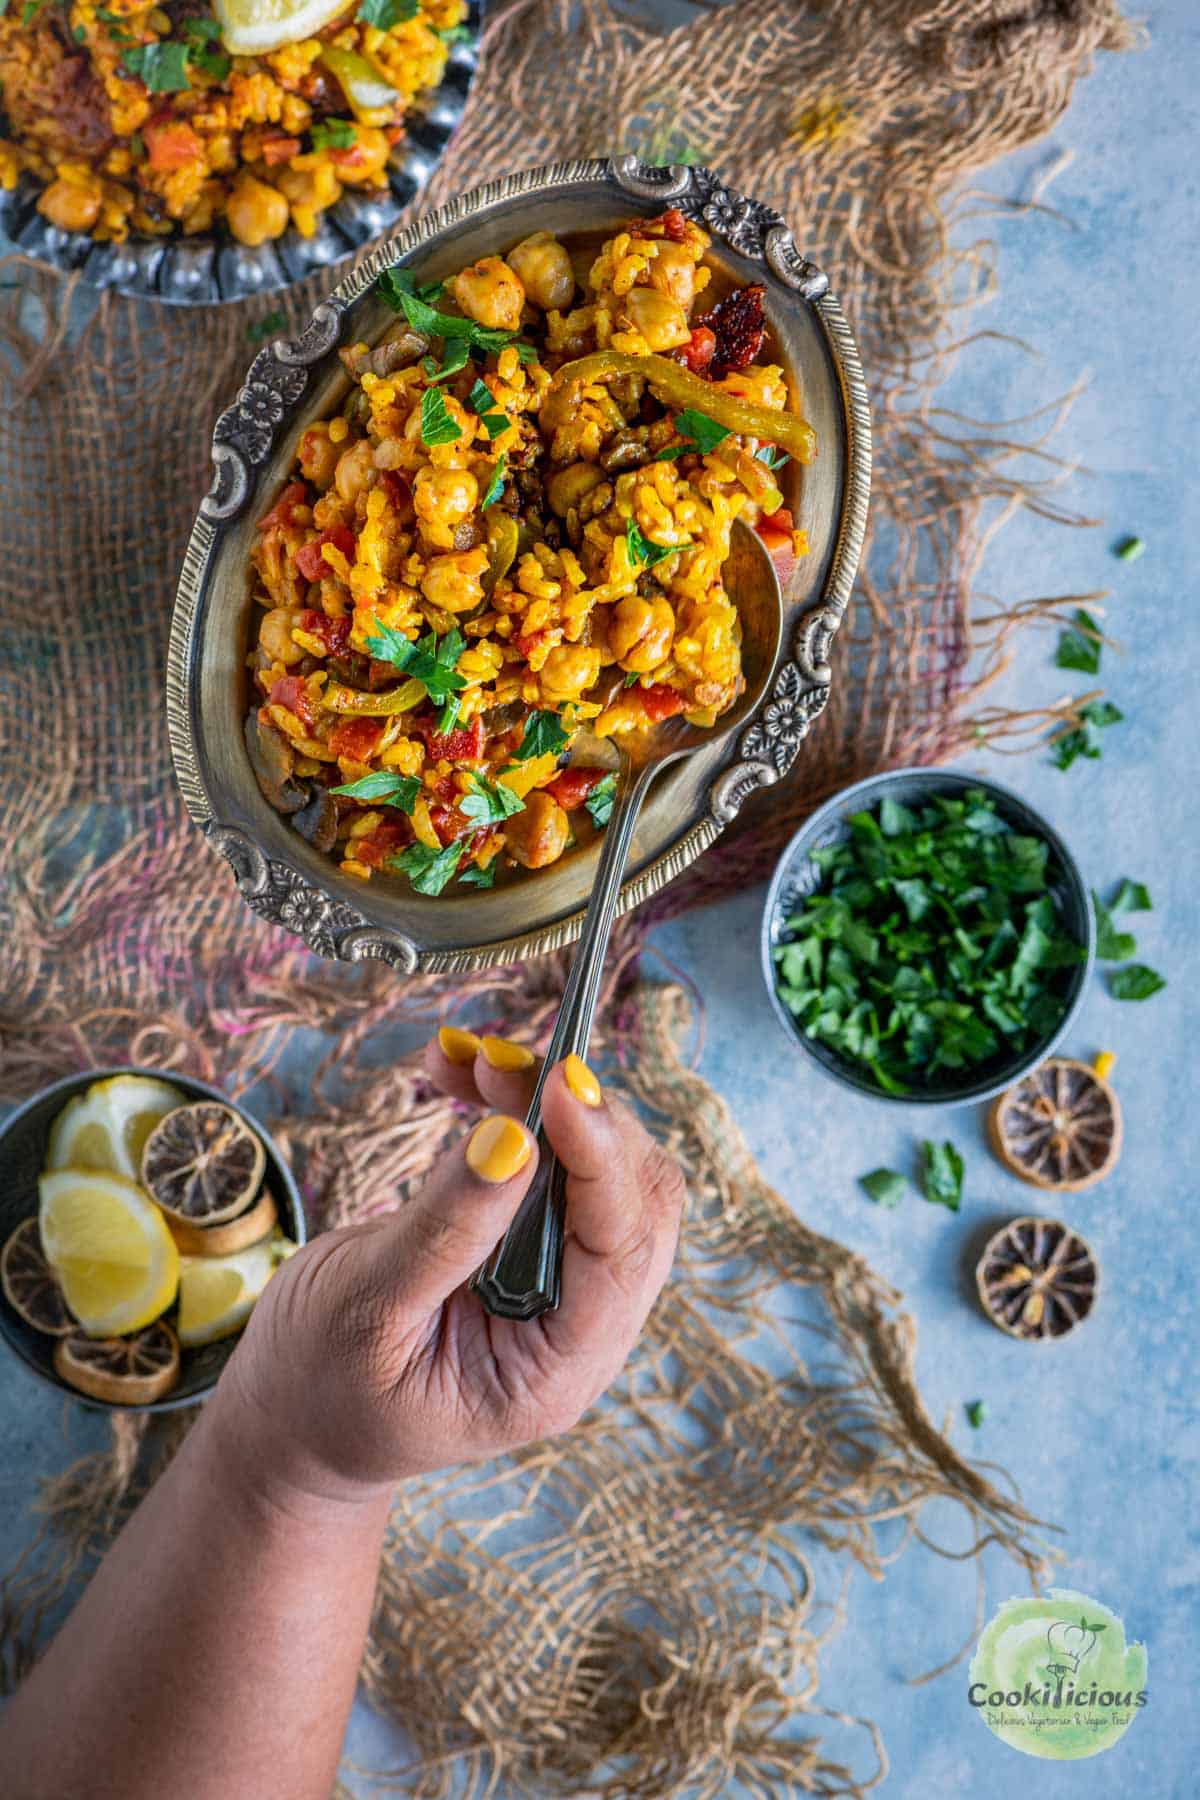 a hand digging into a plate full of Vegan Paella with a spoon